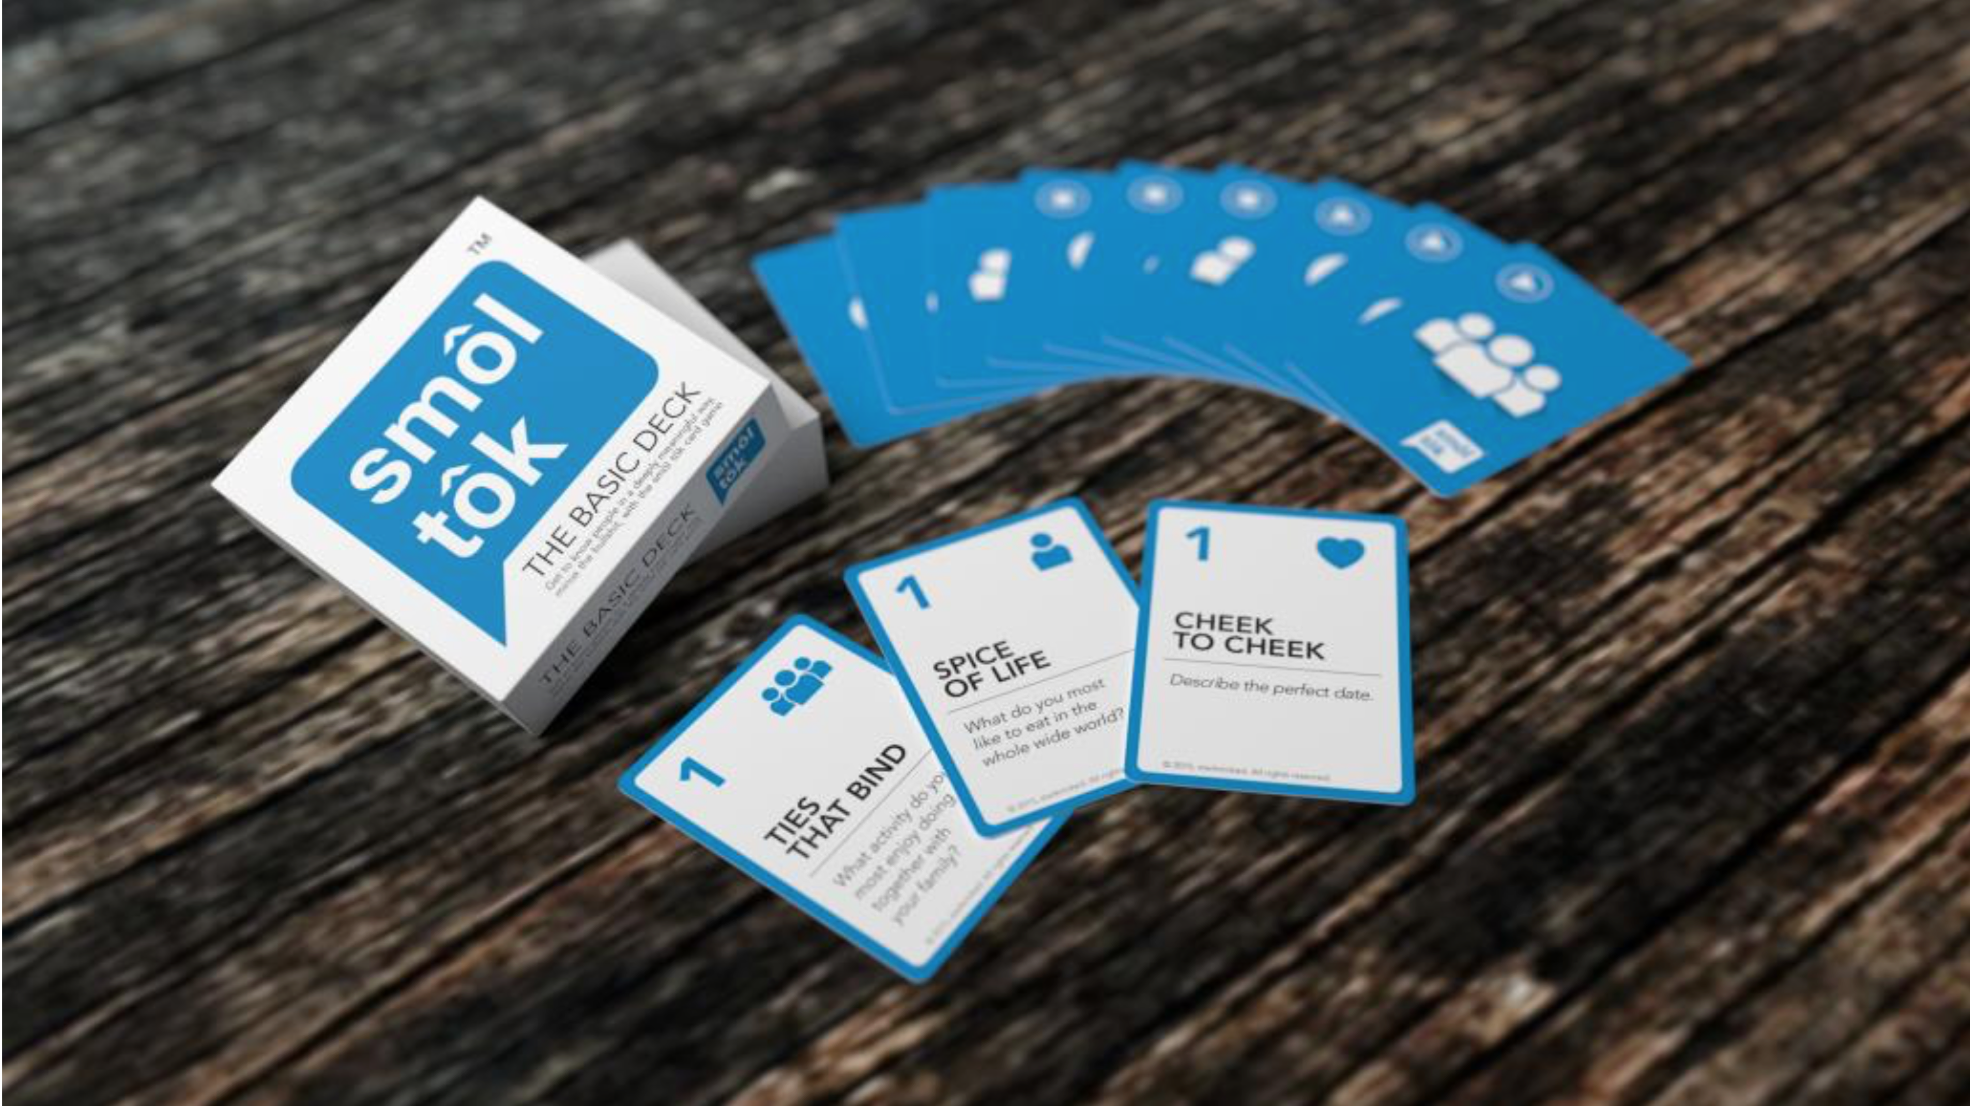 Singapore Start Up Launches New Card Game – smôl tôk